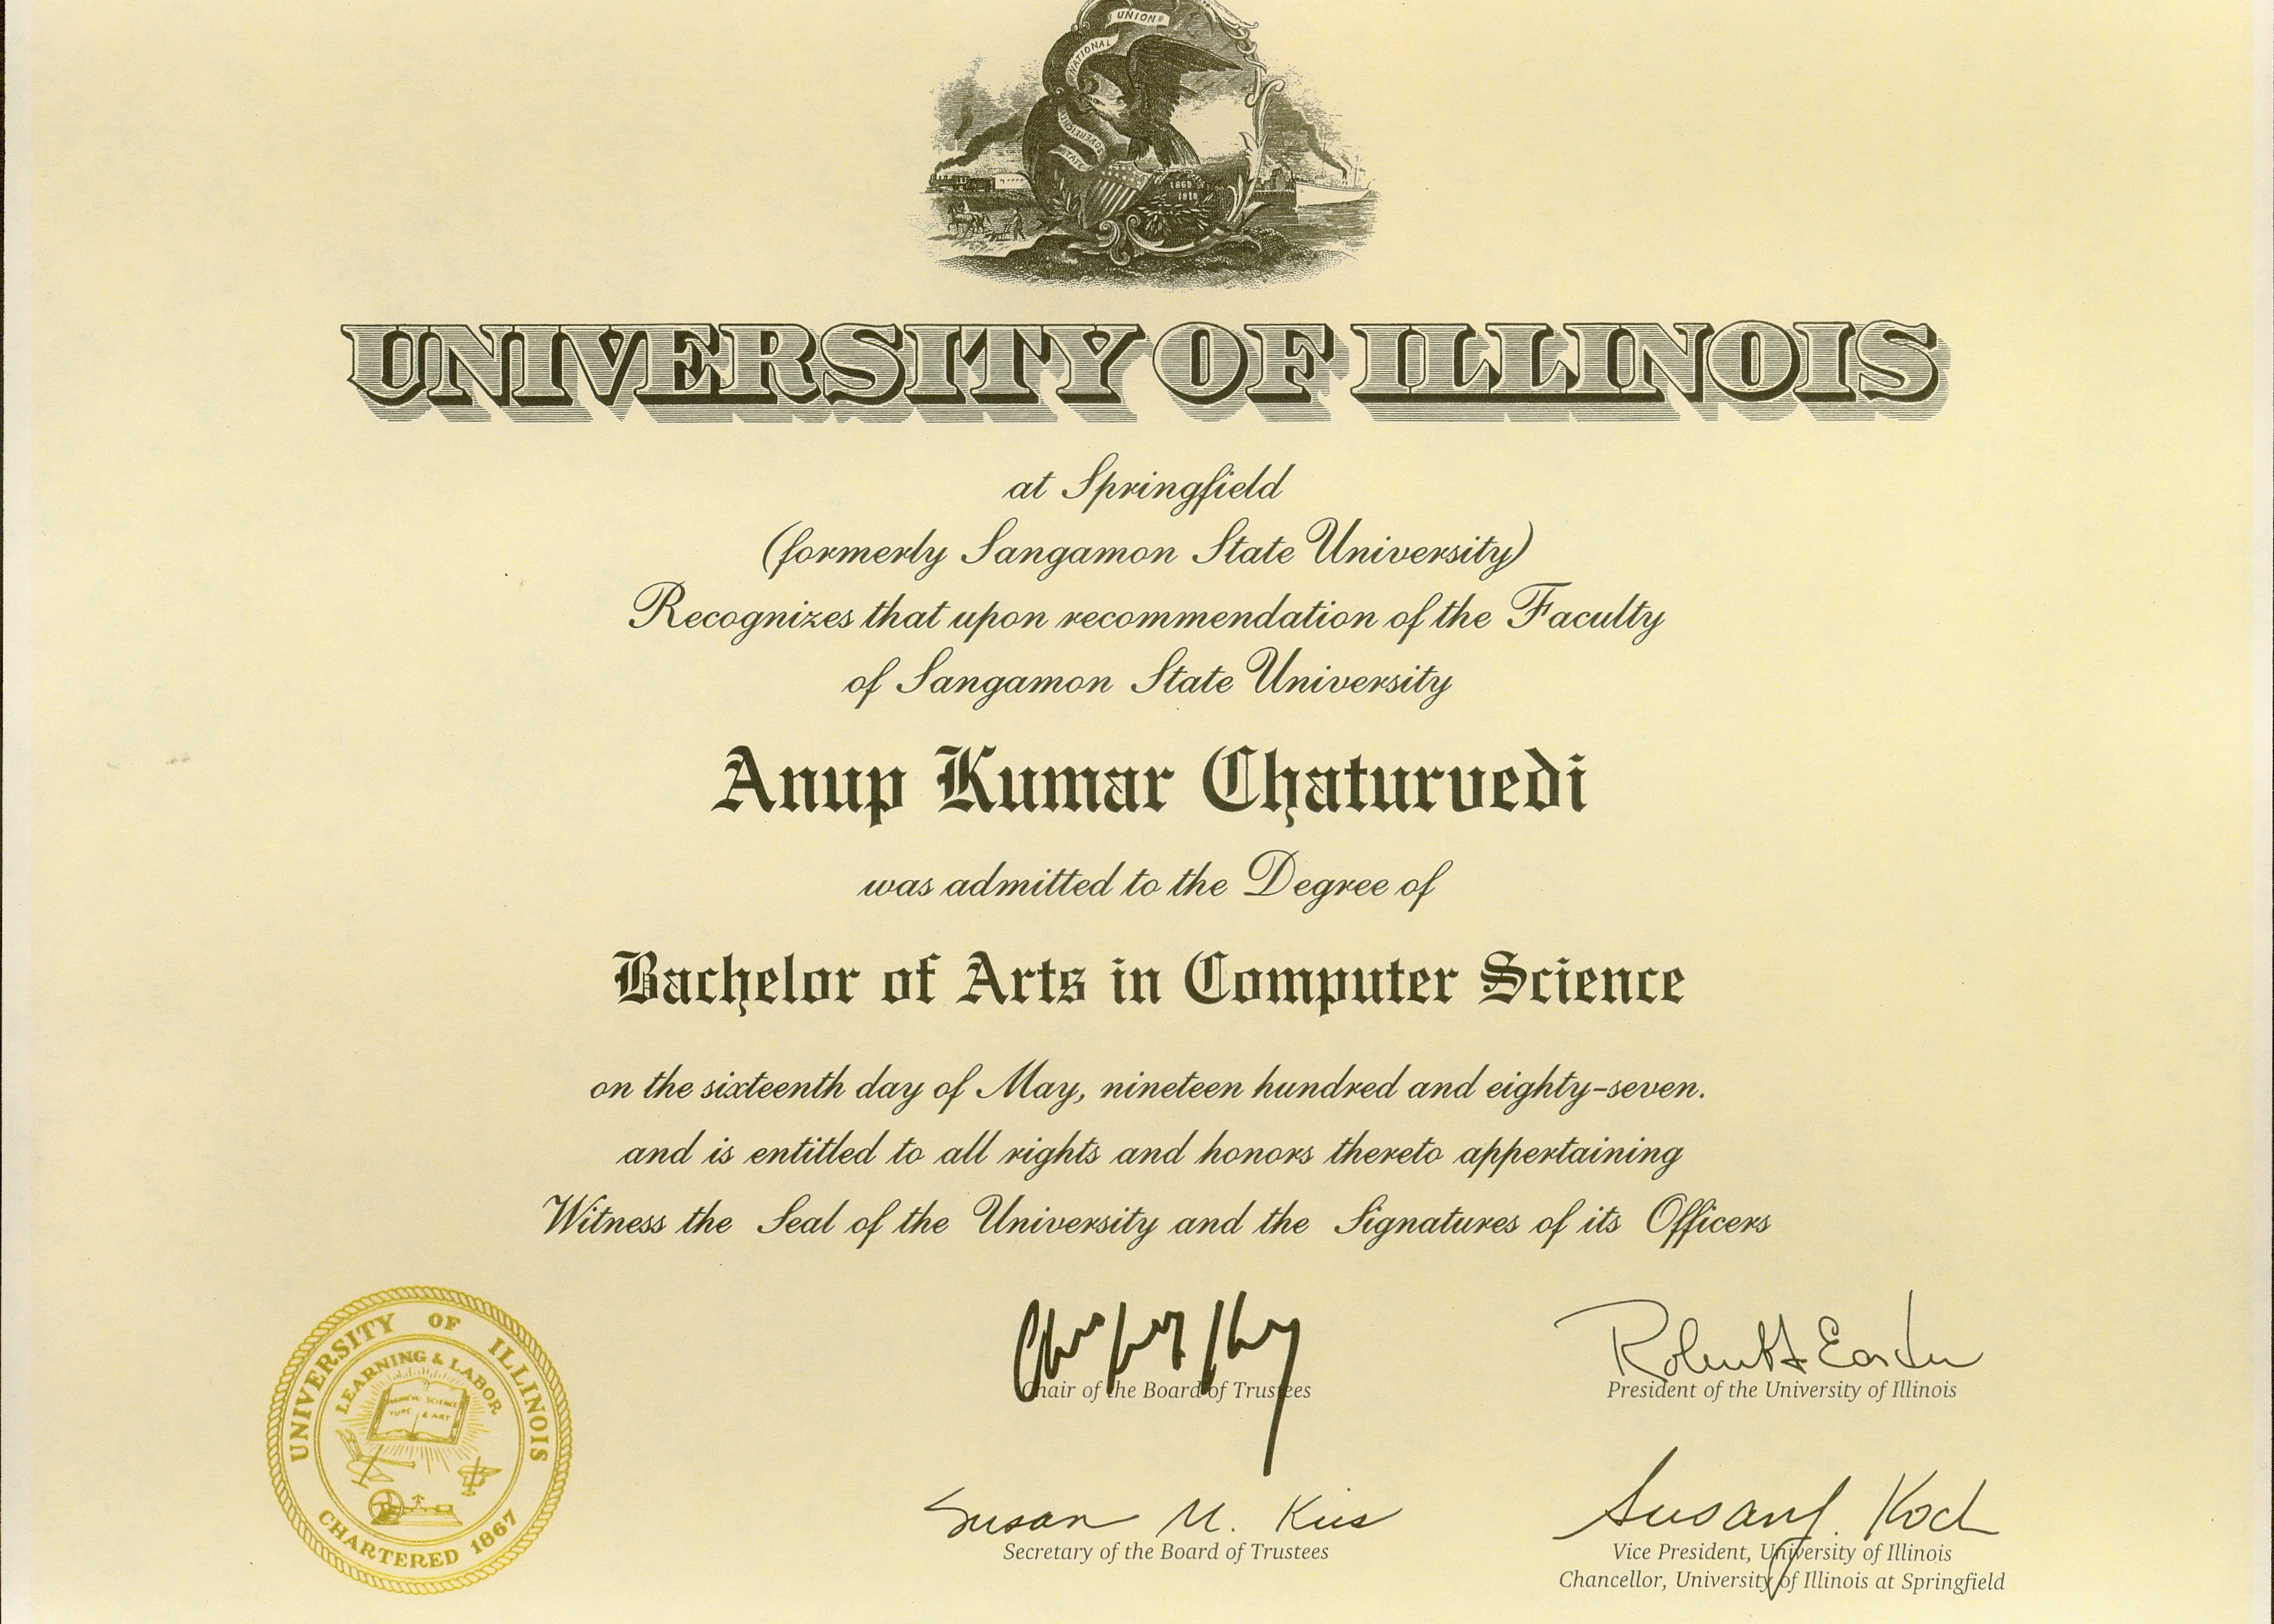 Bachelors Degree in Computer Science (1986)